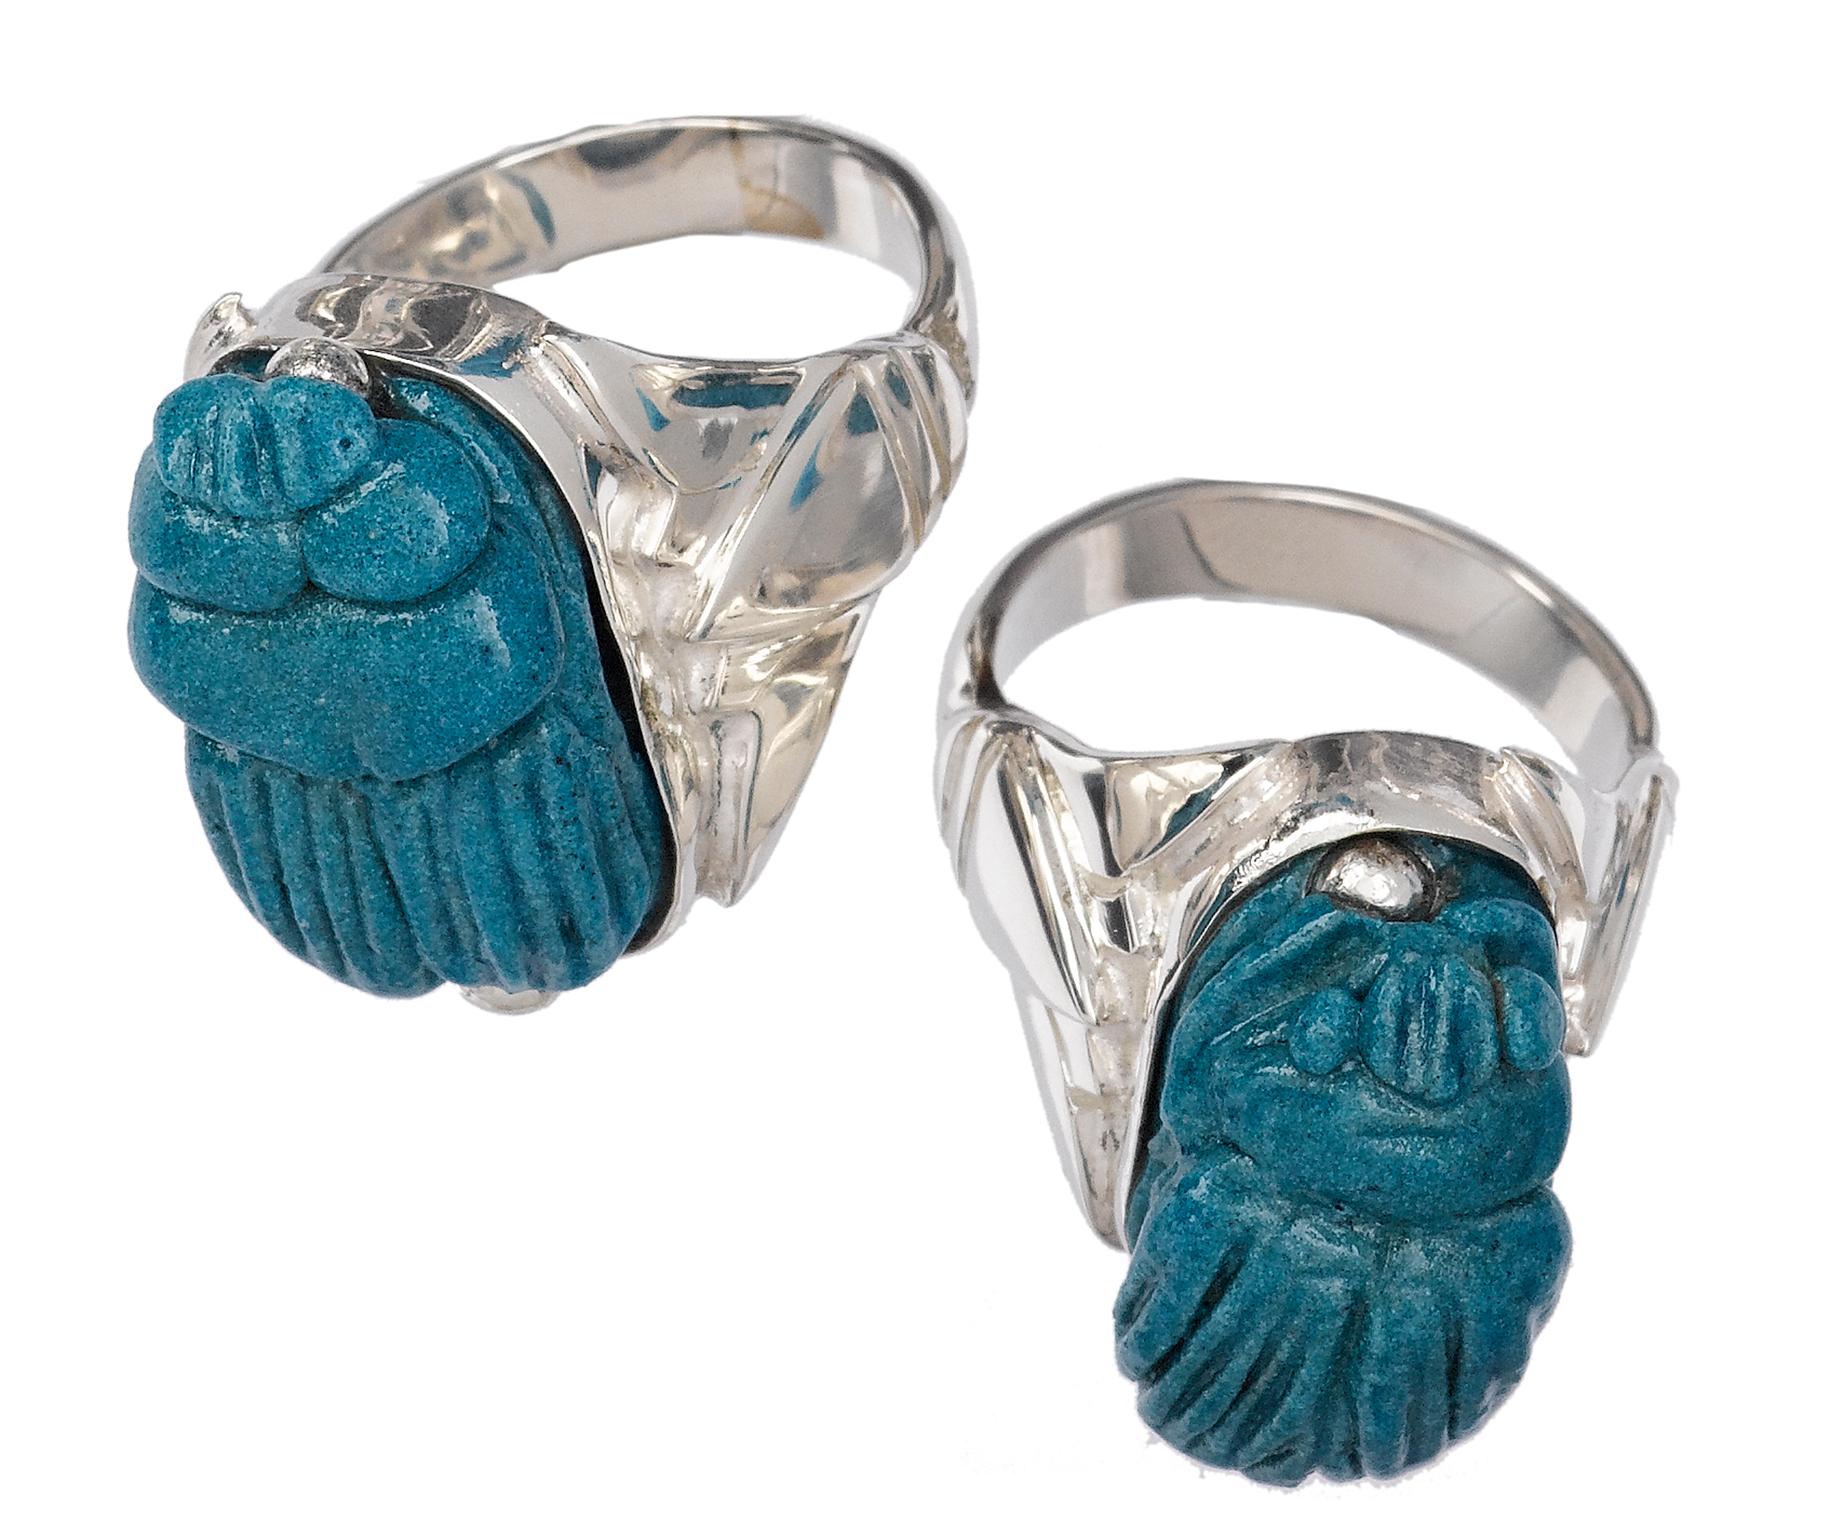 Egyptian Revival Dark Turquoise Faience Scarab Ring Set in Sterling Silver with Egyptian Motif For Sale